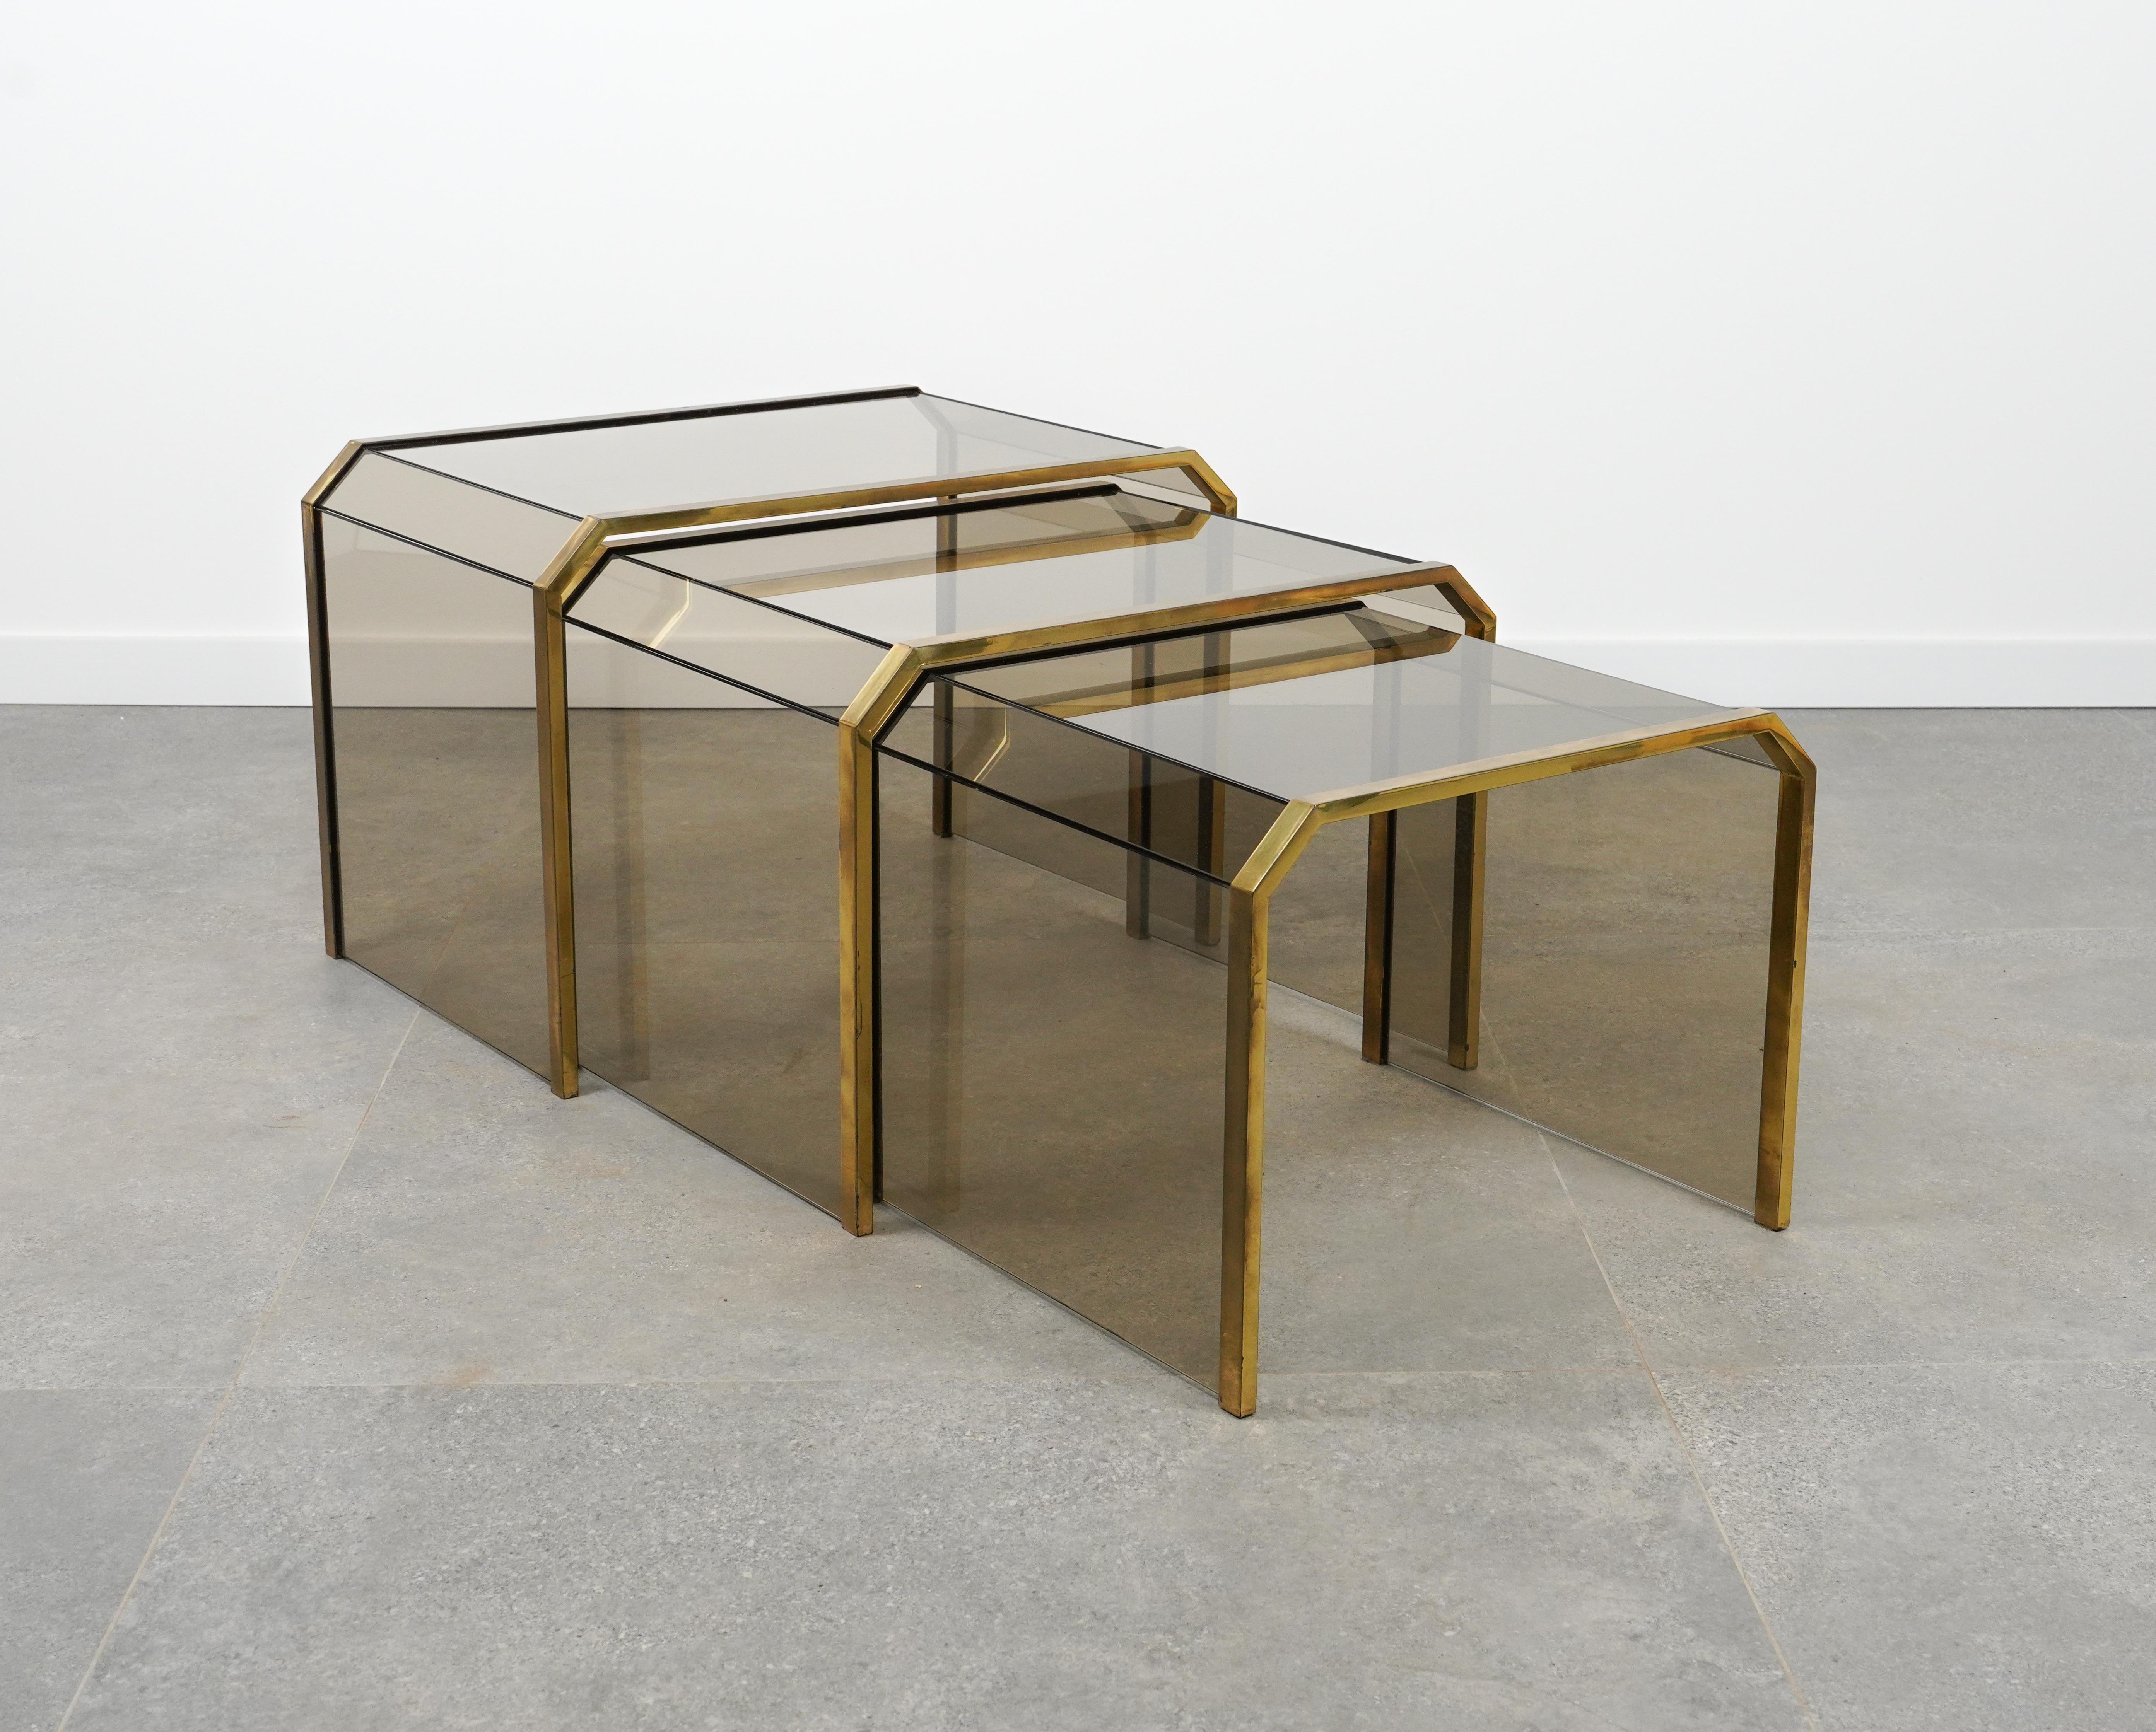 Metal Brass & Glass Set of Three Nesting Tables Gallotti & Radice Style, Italy 1970s For Sale